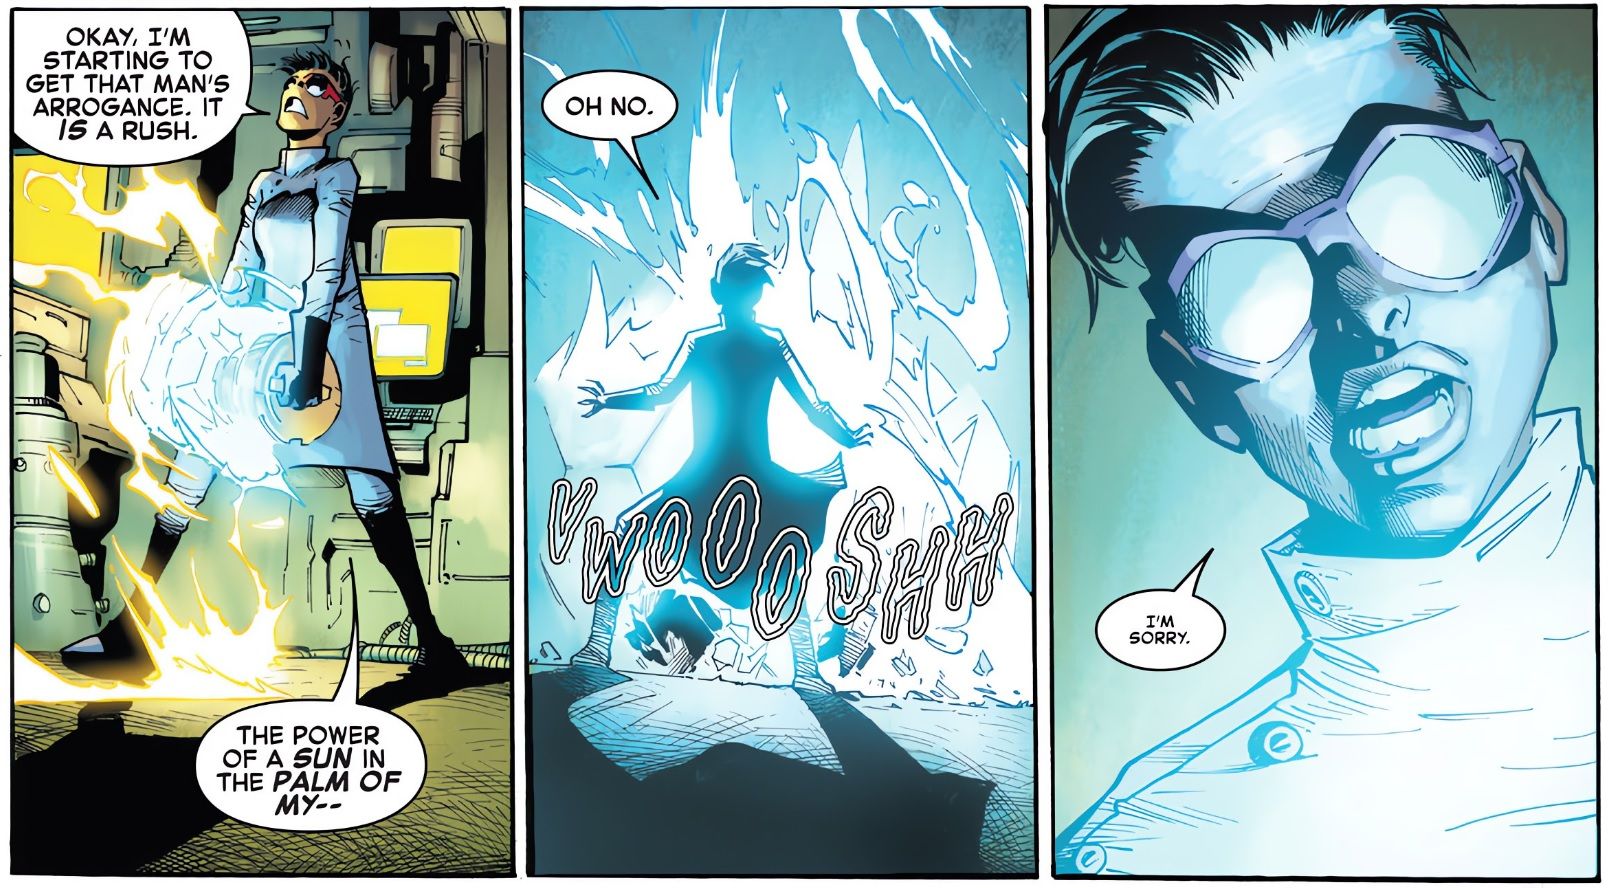 Estrella attempts to steal the reactor, only to have it explode point-blank with the light reflected in her goggles.